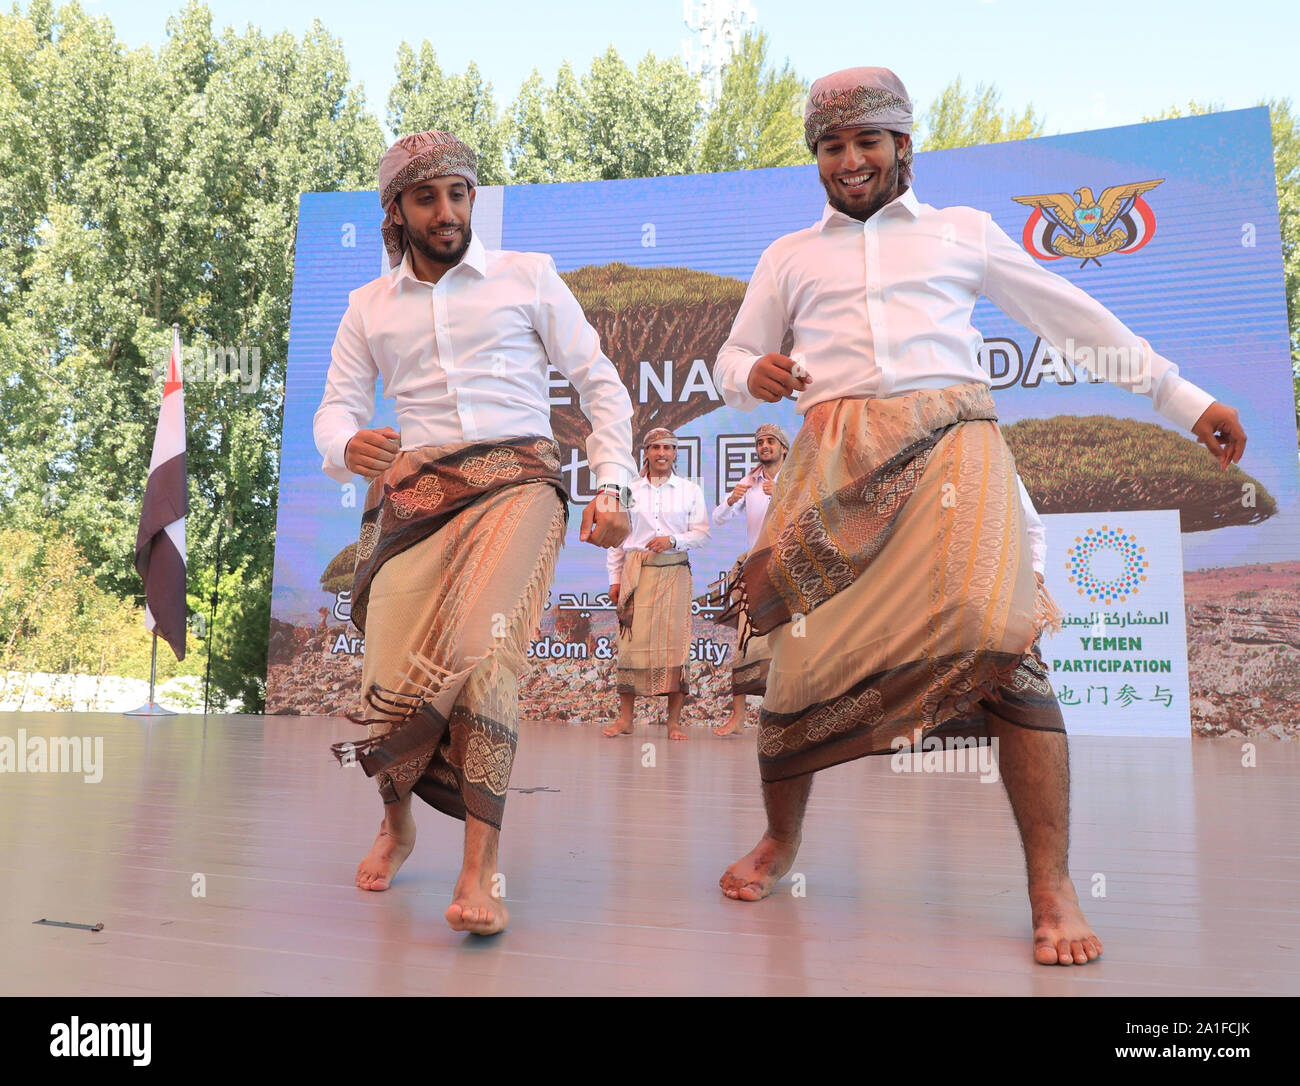 Beijing, China. 26th Sep, 2019. Actors perform during the 'Yemen Day' event of the Beijing International Horticultural Exhibition in Beijing, capital of China, Sept. 26, 2019. The expo held its 'Yemen Day' event on Thursday. Credit: Duan Xuefeng/Xinhua Stock Photo